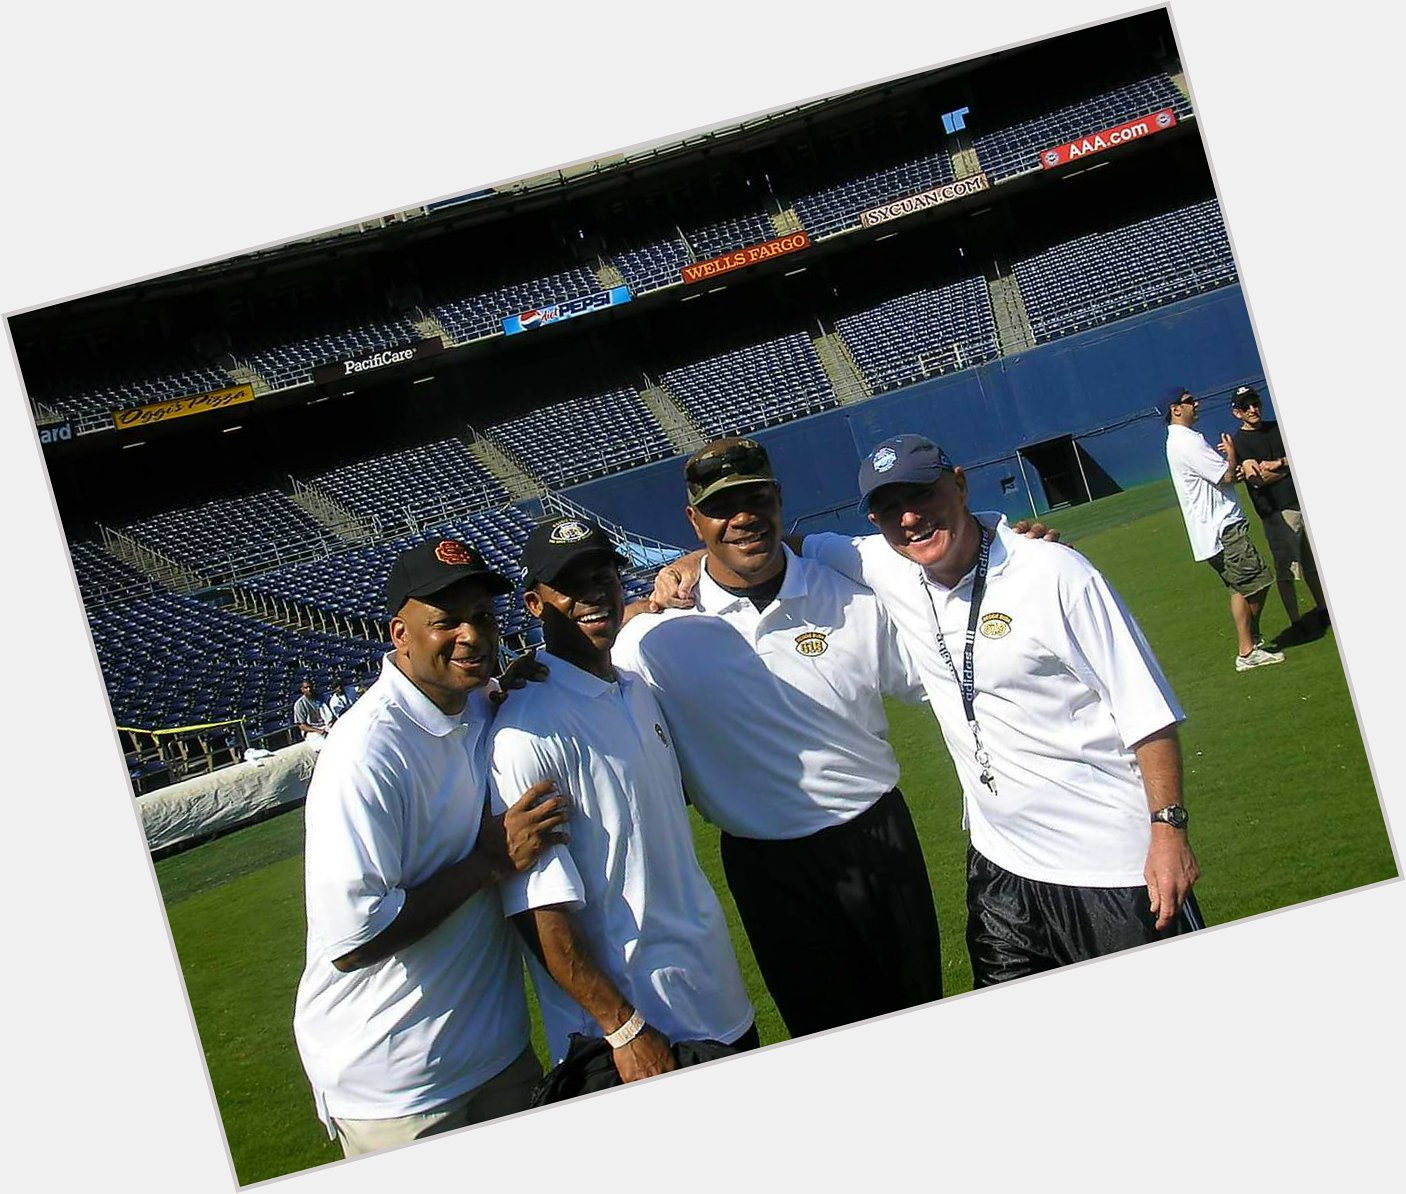 Happy Bday Big Banger, Ronnie Lott.  This was a GREAT DAY with some amazing guys!  Lott, Allen, Seau 